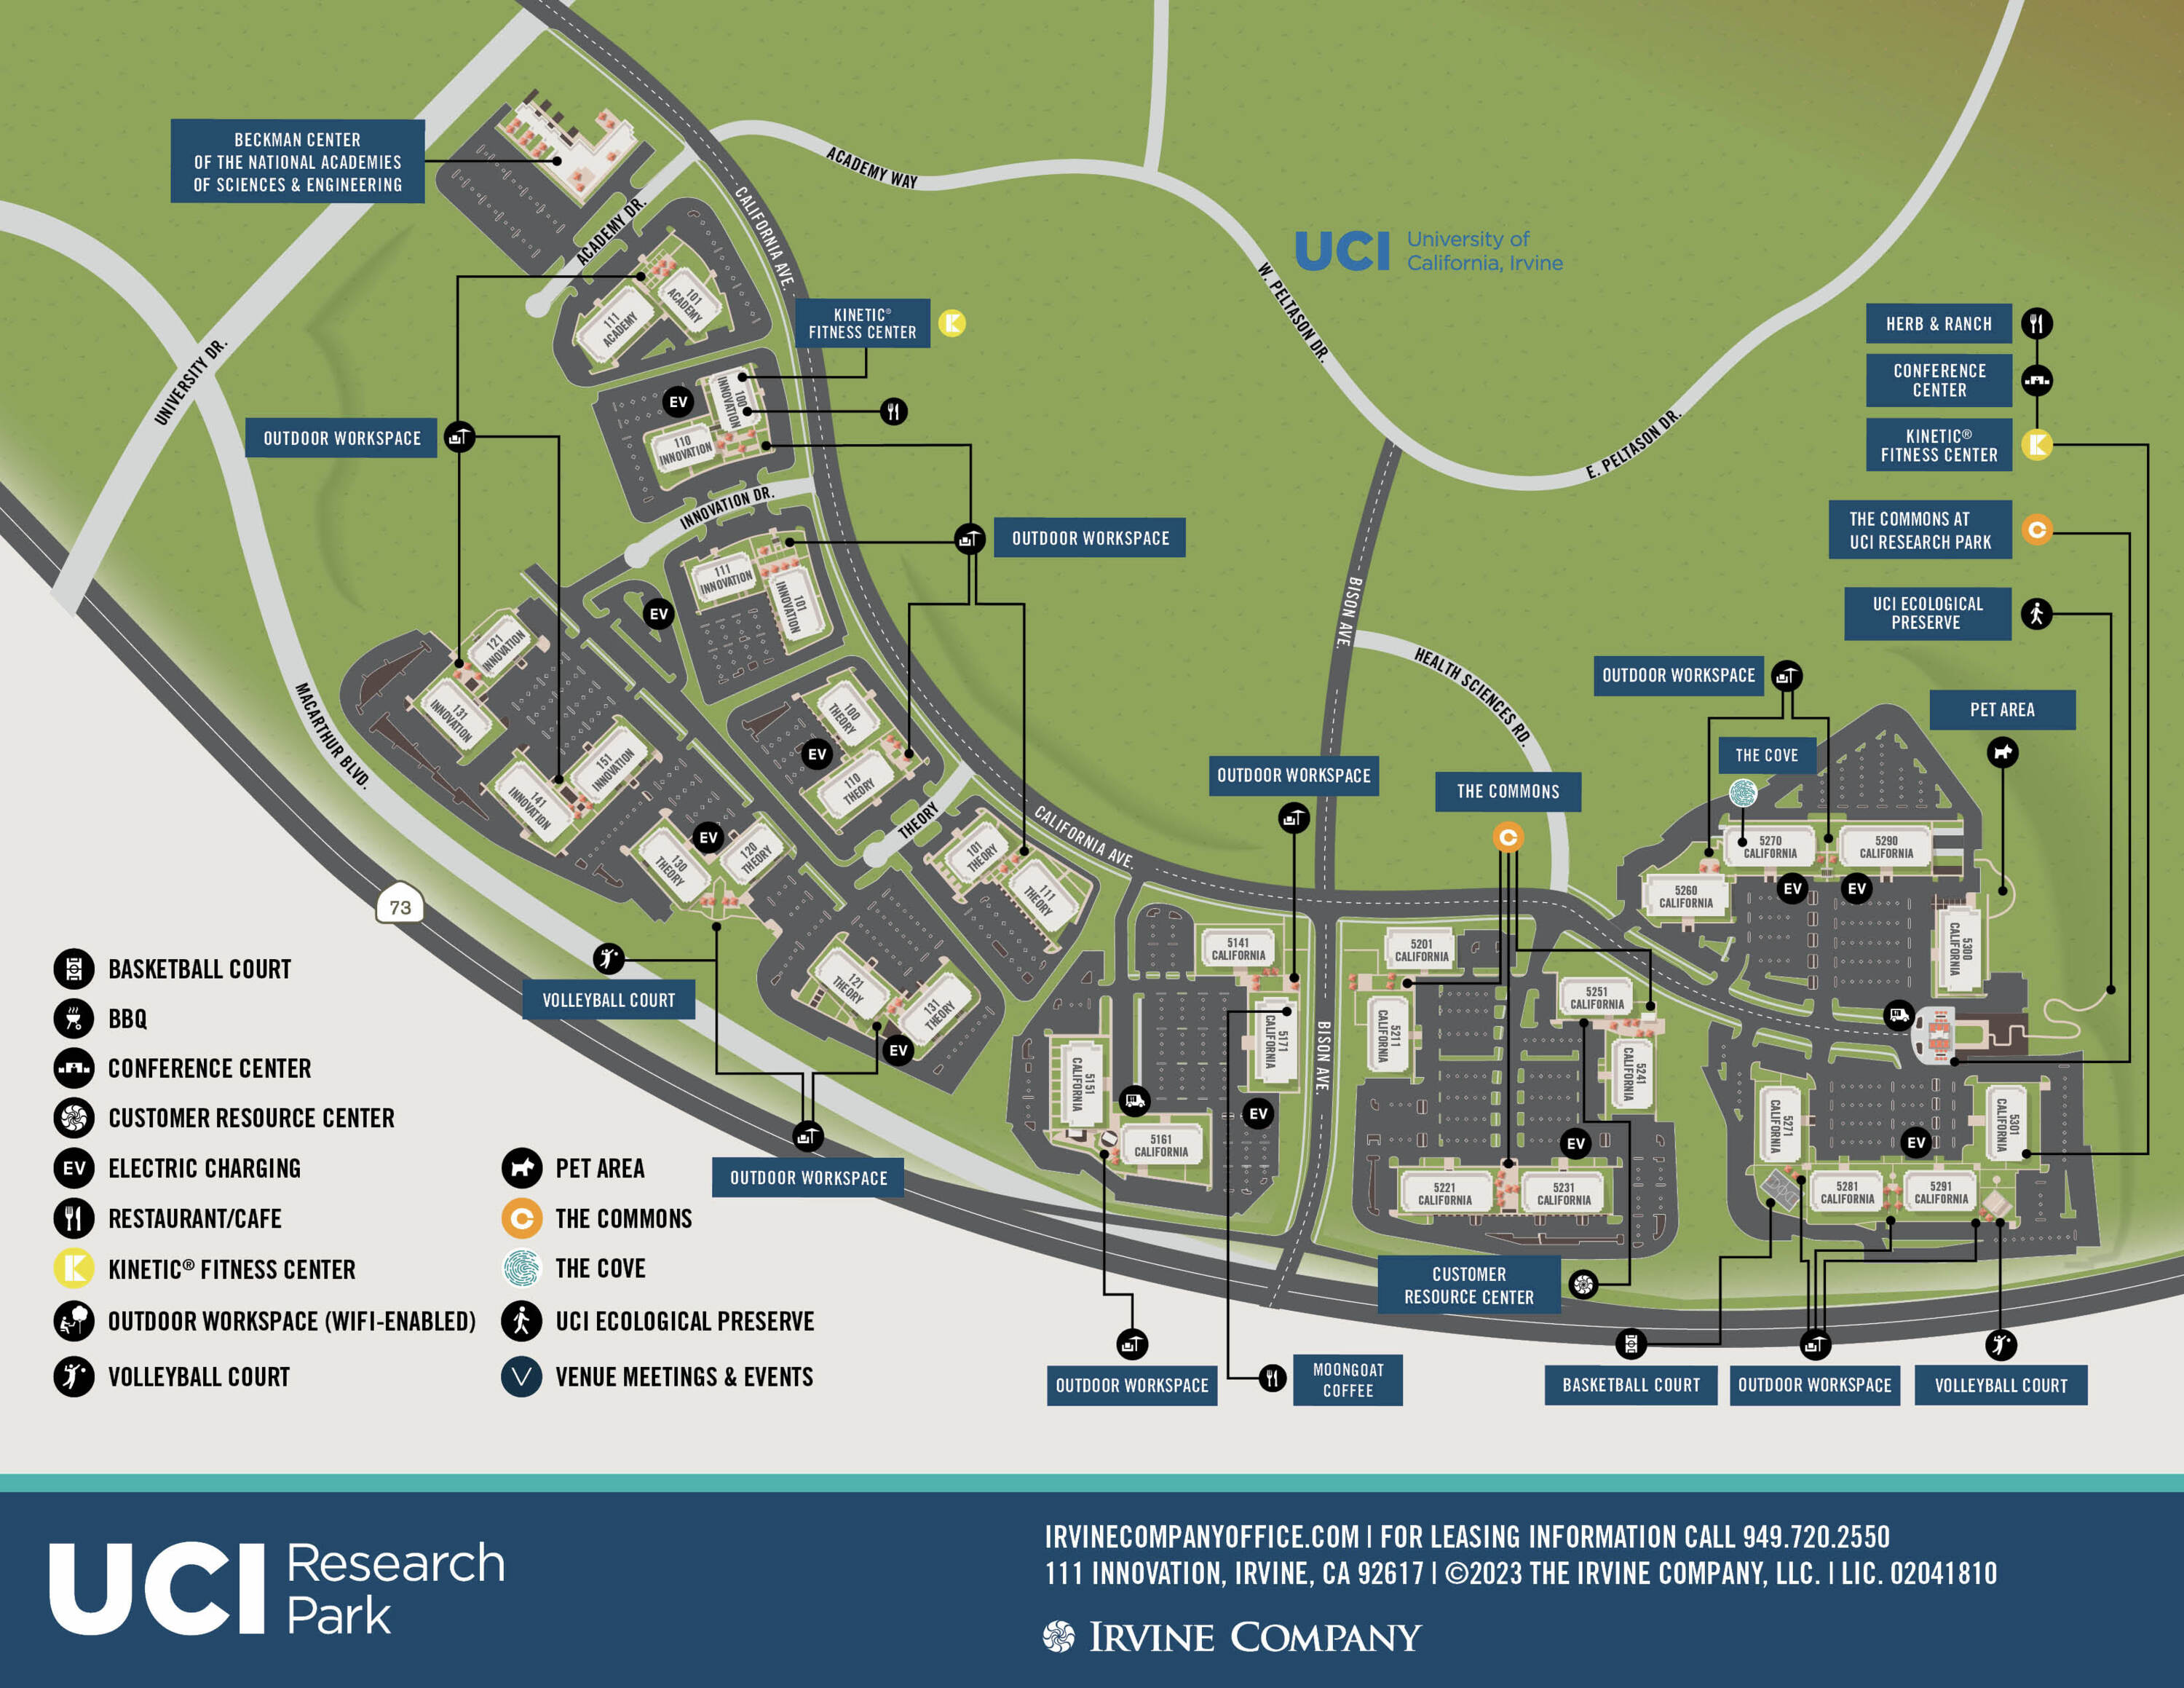 Site Map for UCIRP located in Irvine, CA.